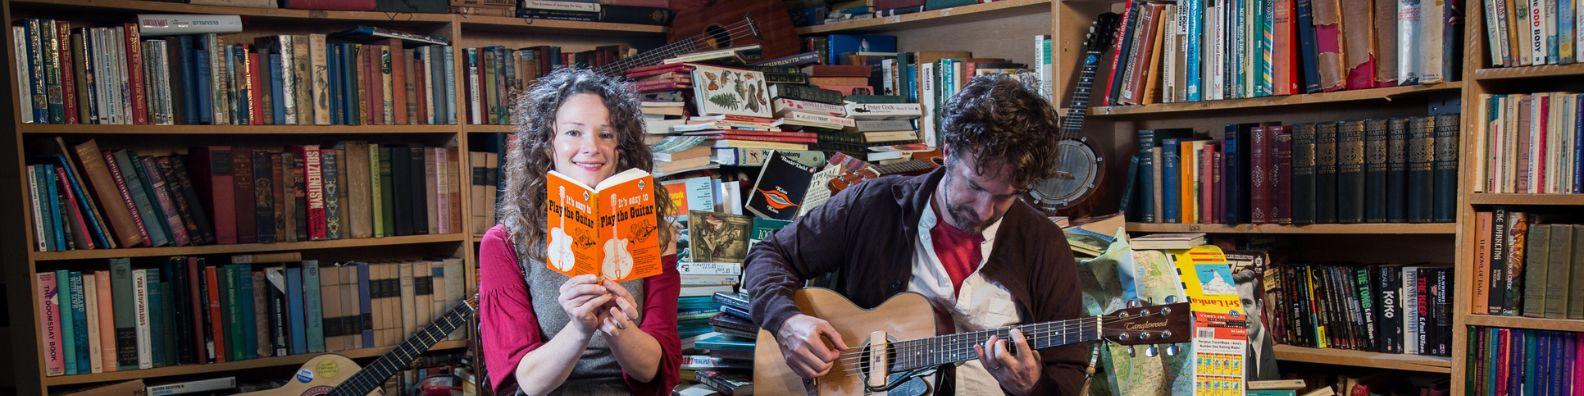 Bookshop band duo Beth and Ben Please sitting in a bookshop surrounded by books. Beth holds a book while Ben plays his guitar.